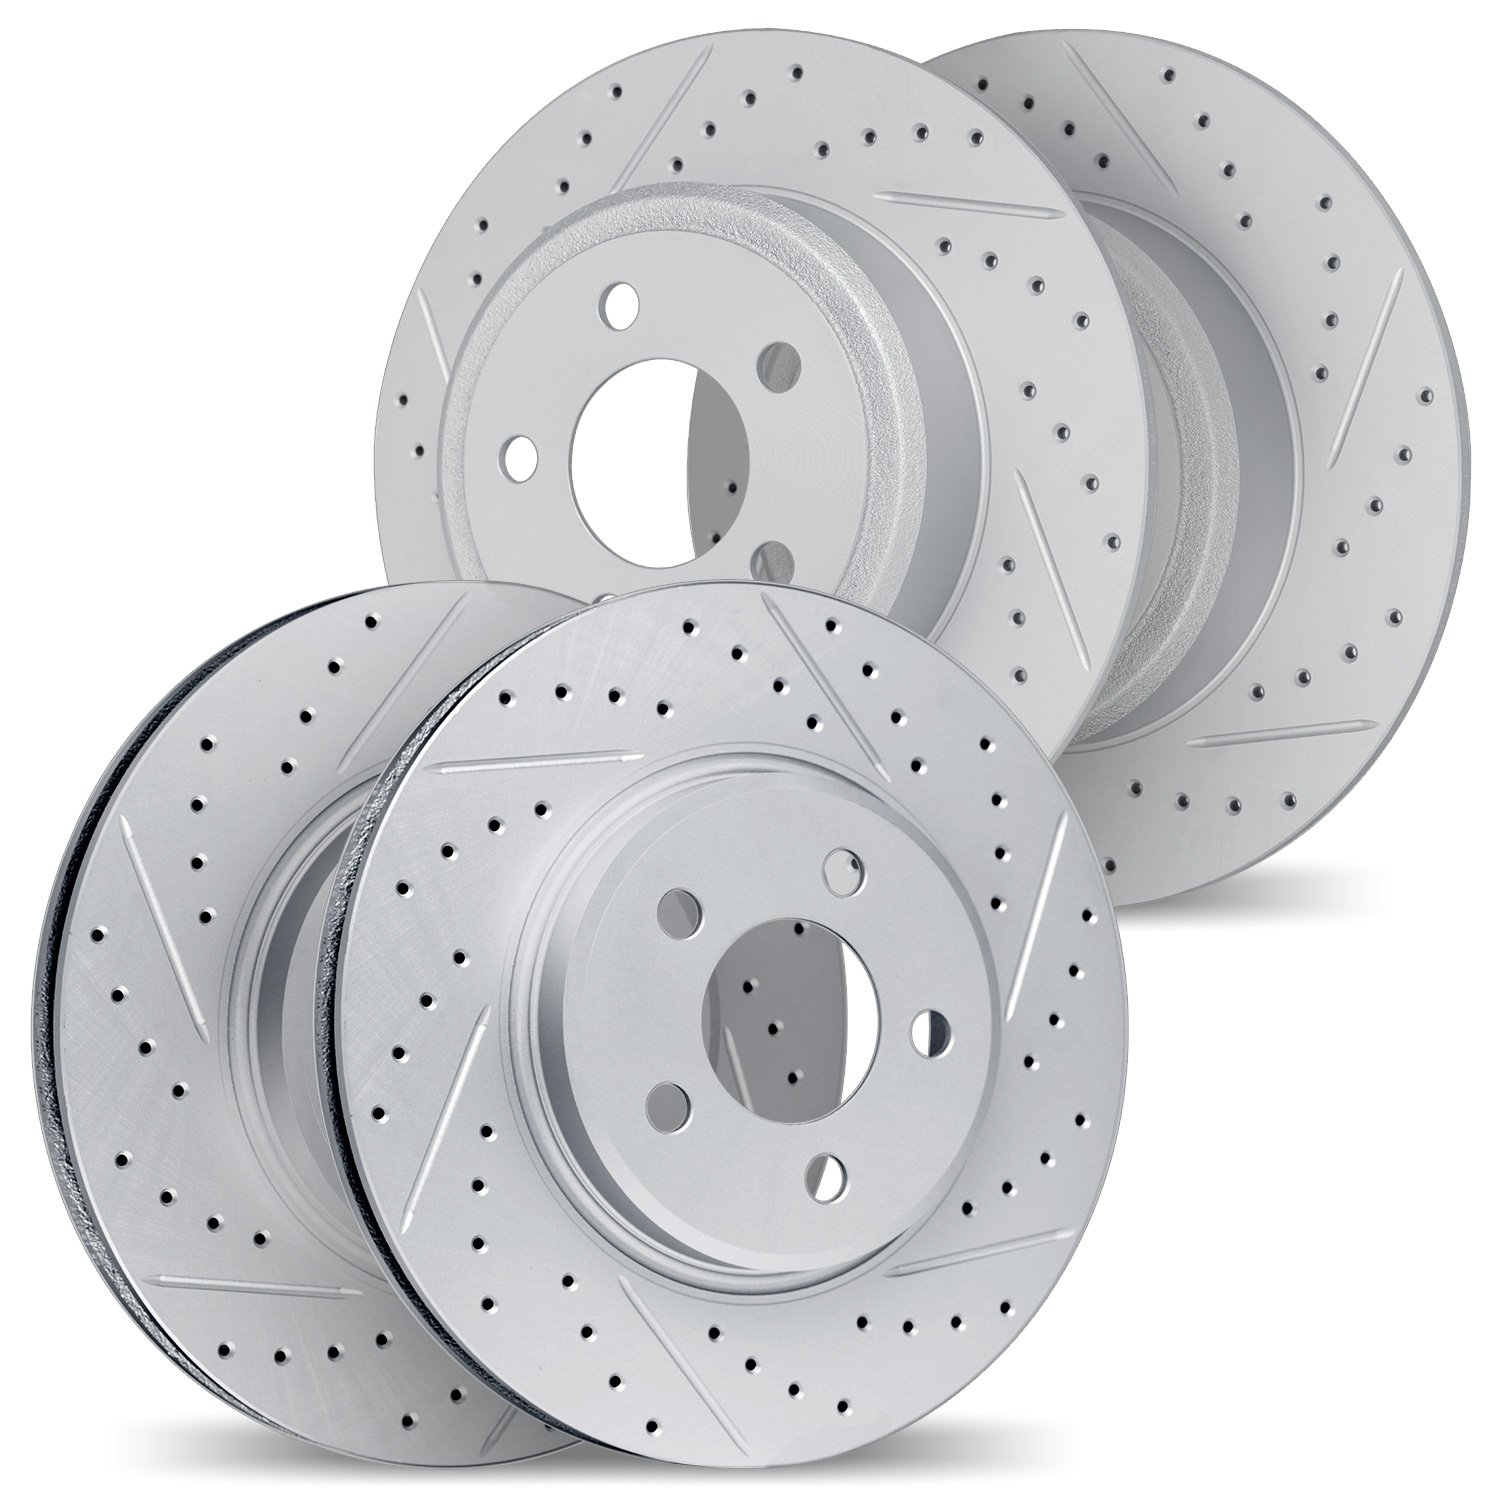 2004-11022 Geoperformance Drilled/Slotted Brake Rotors, 2016-2019 Land Rover, Position: Front and Rear